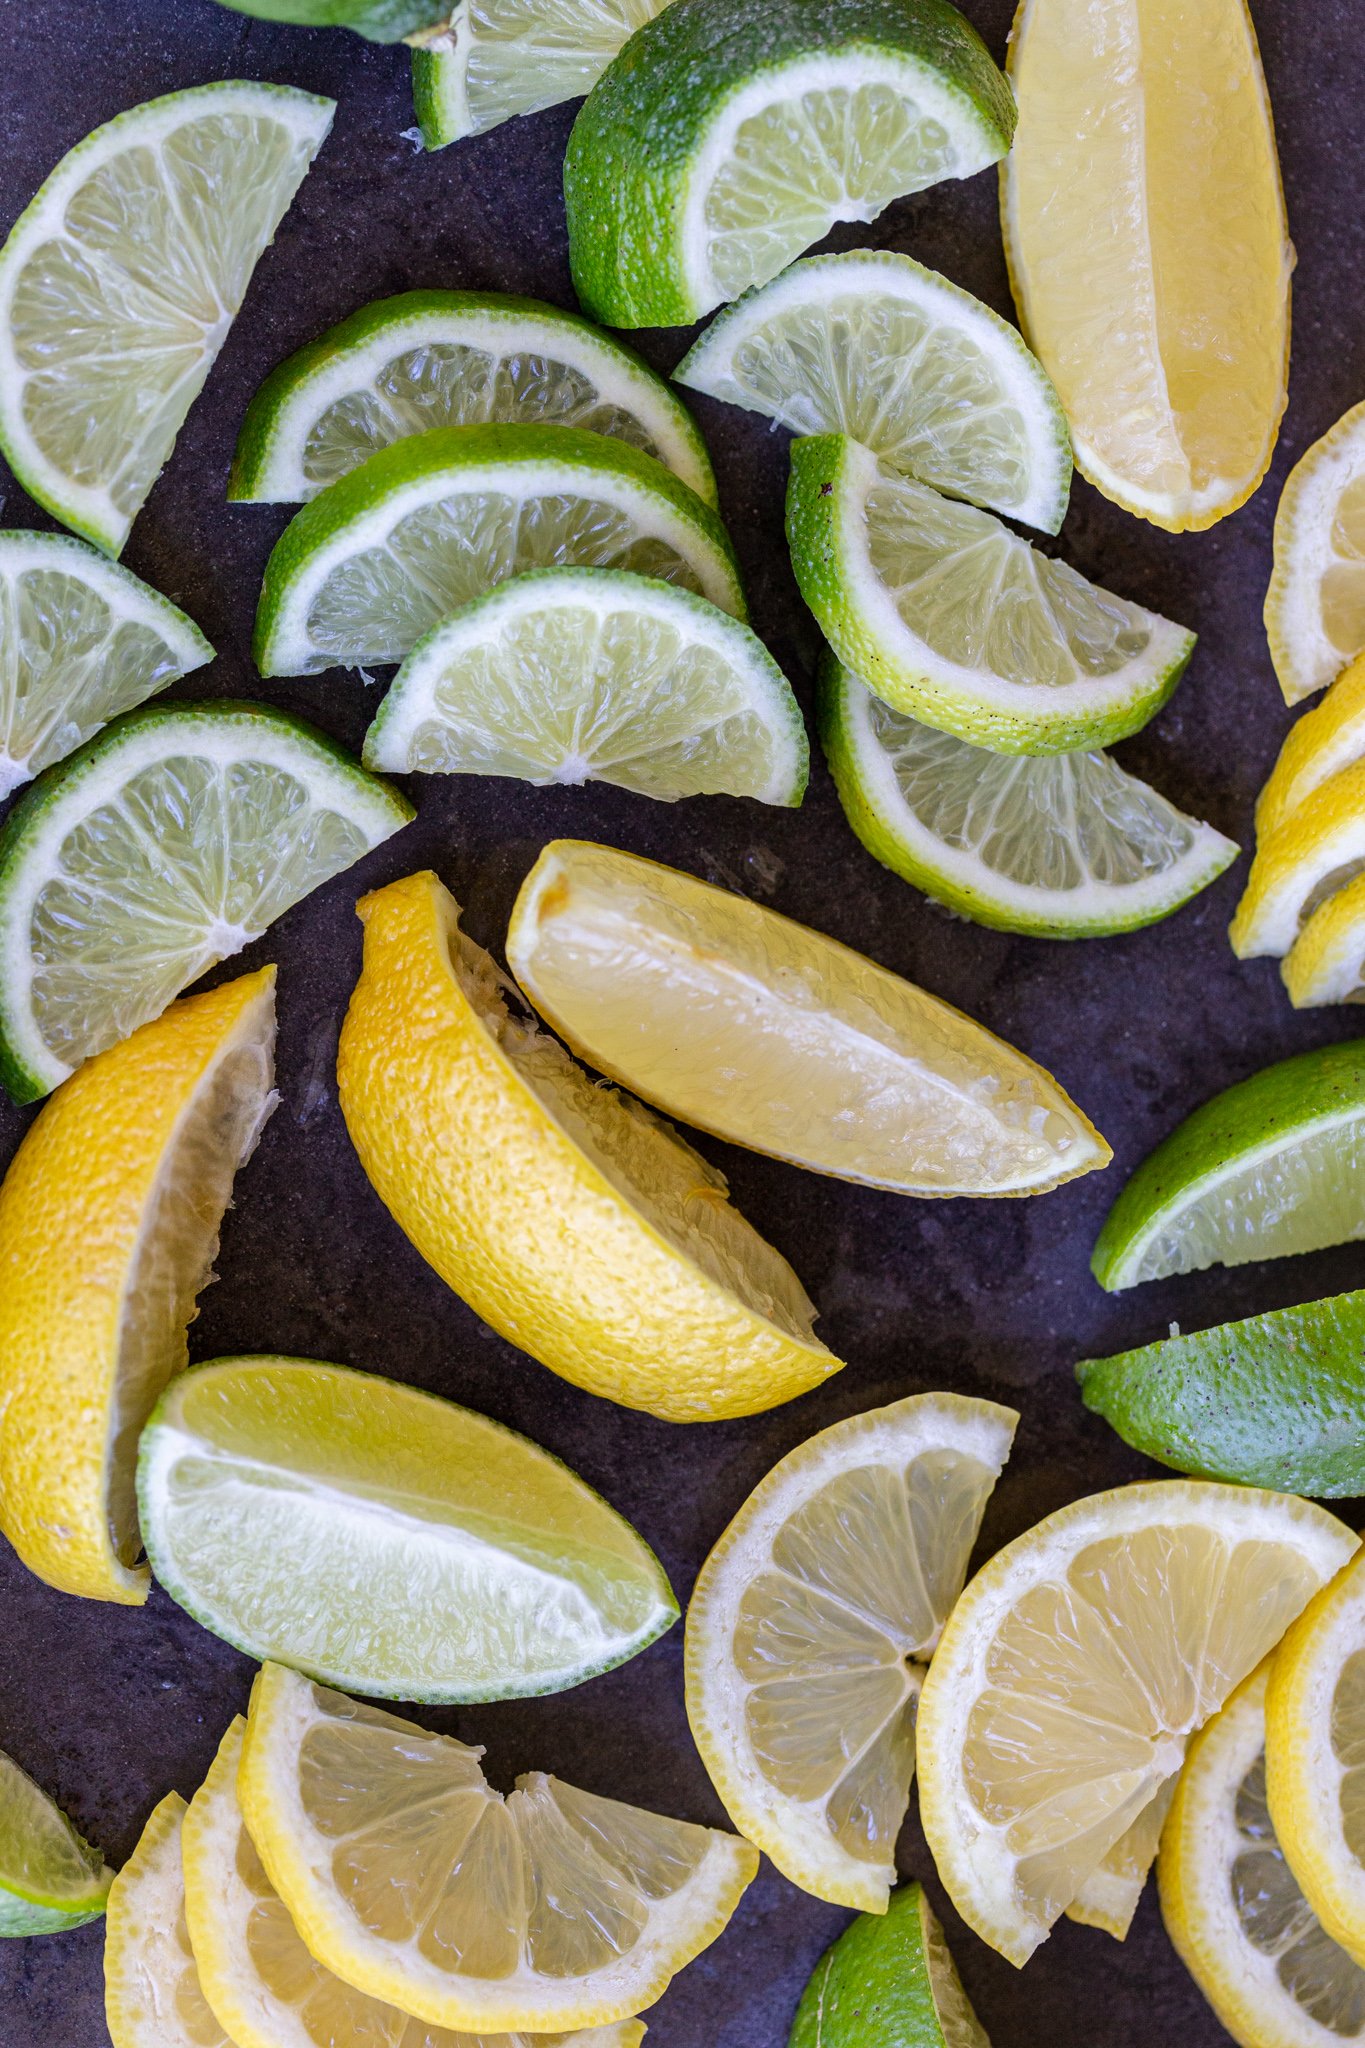 How to Cut Lemons and Limes (Wedge &amp; Slice) - Momsdish